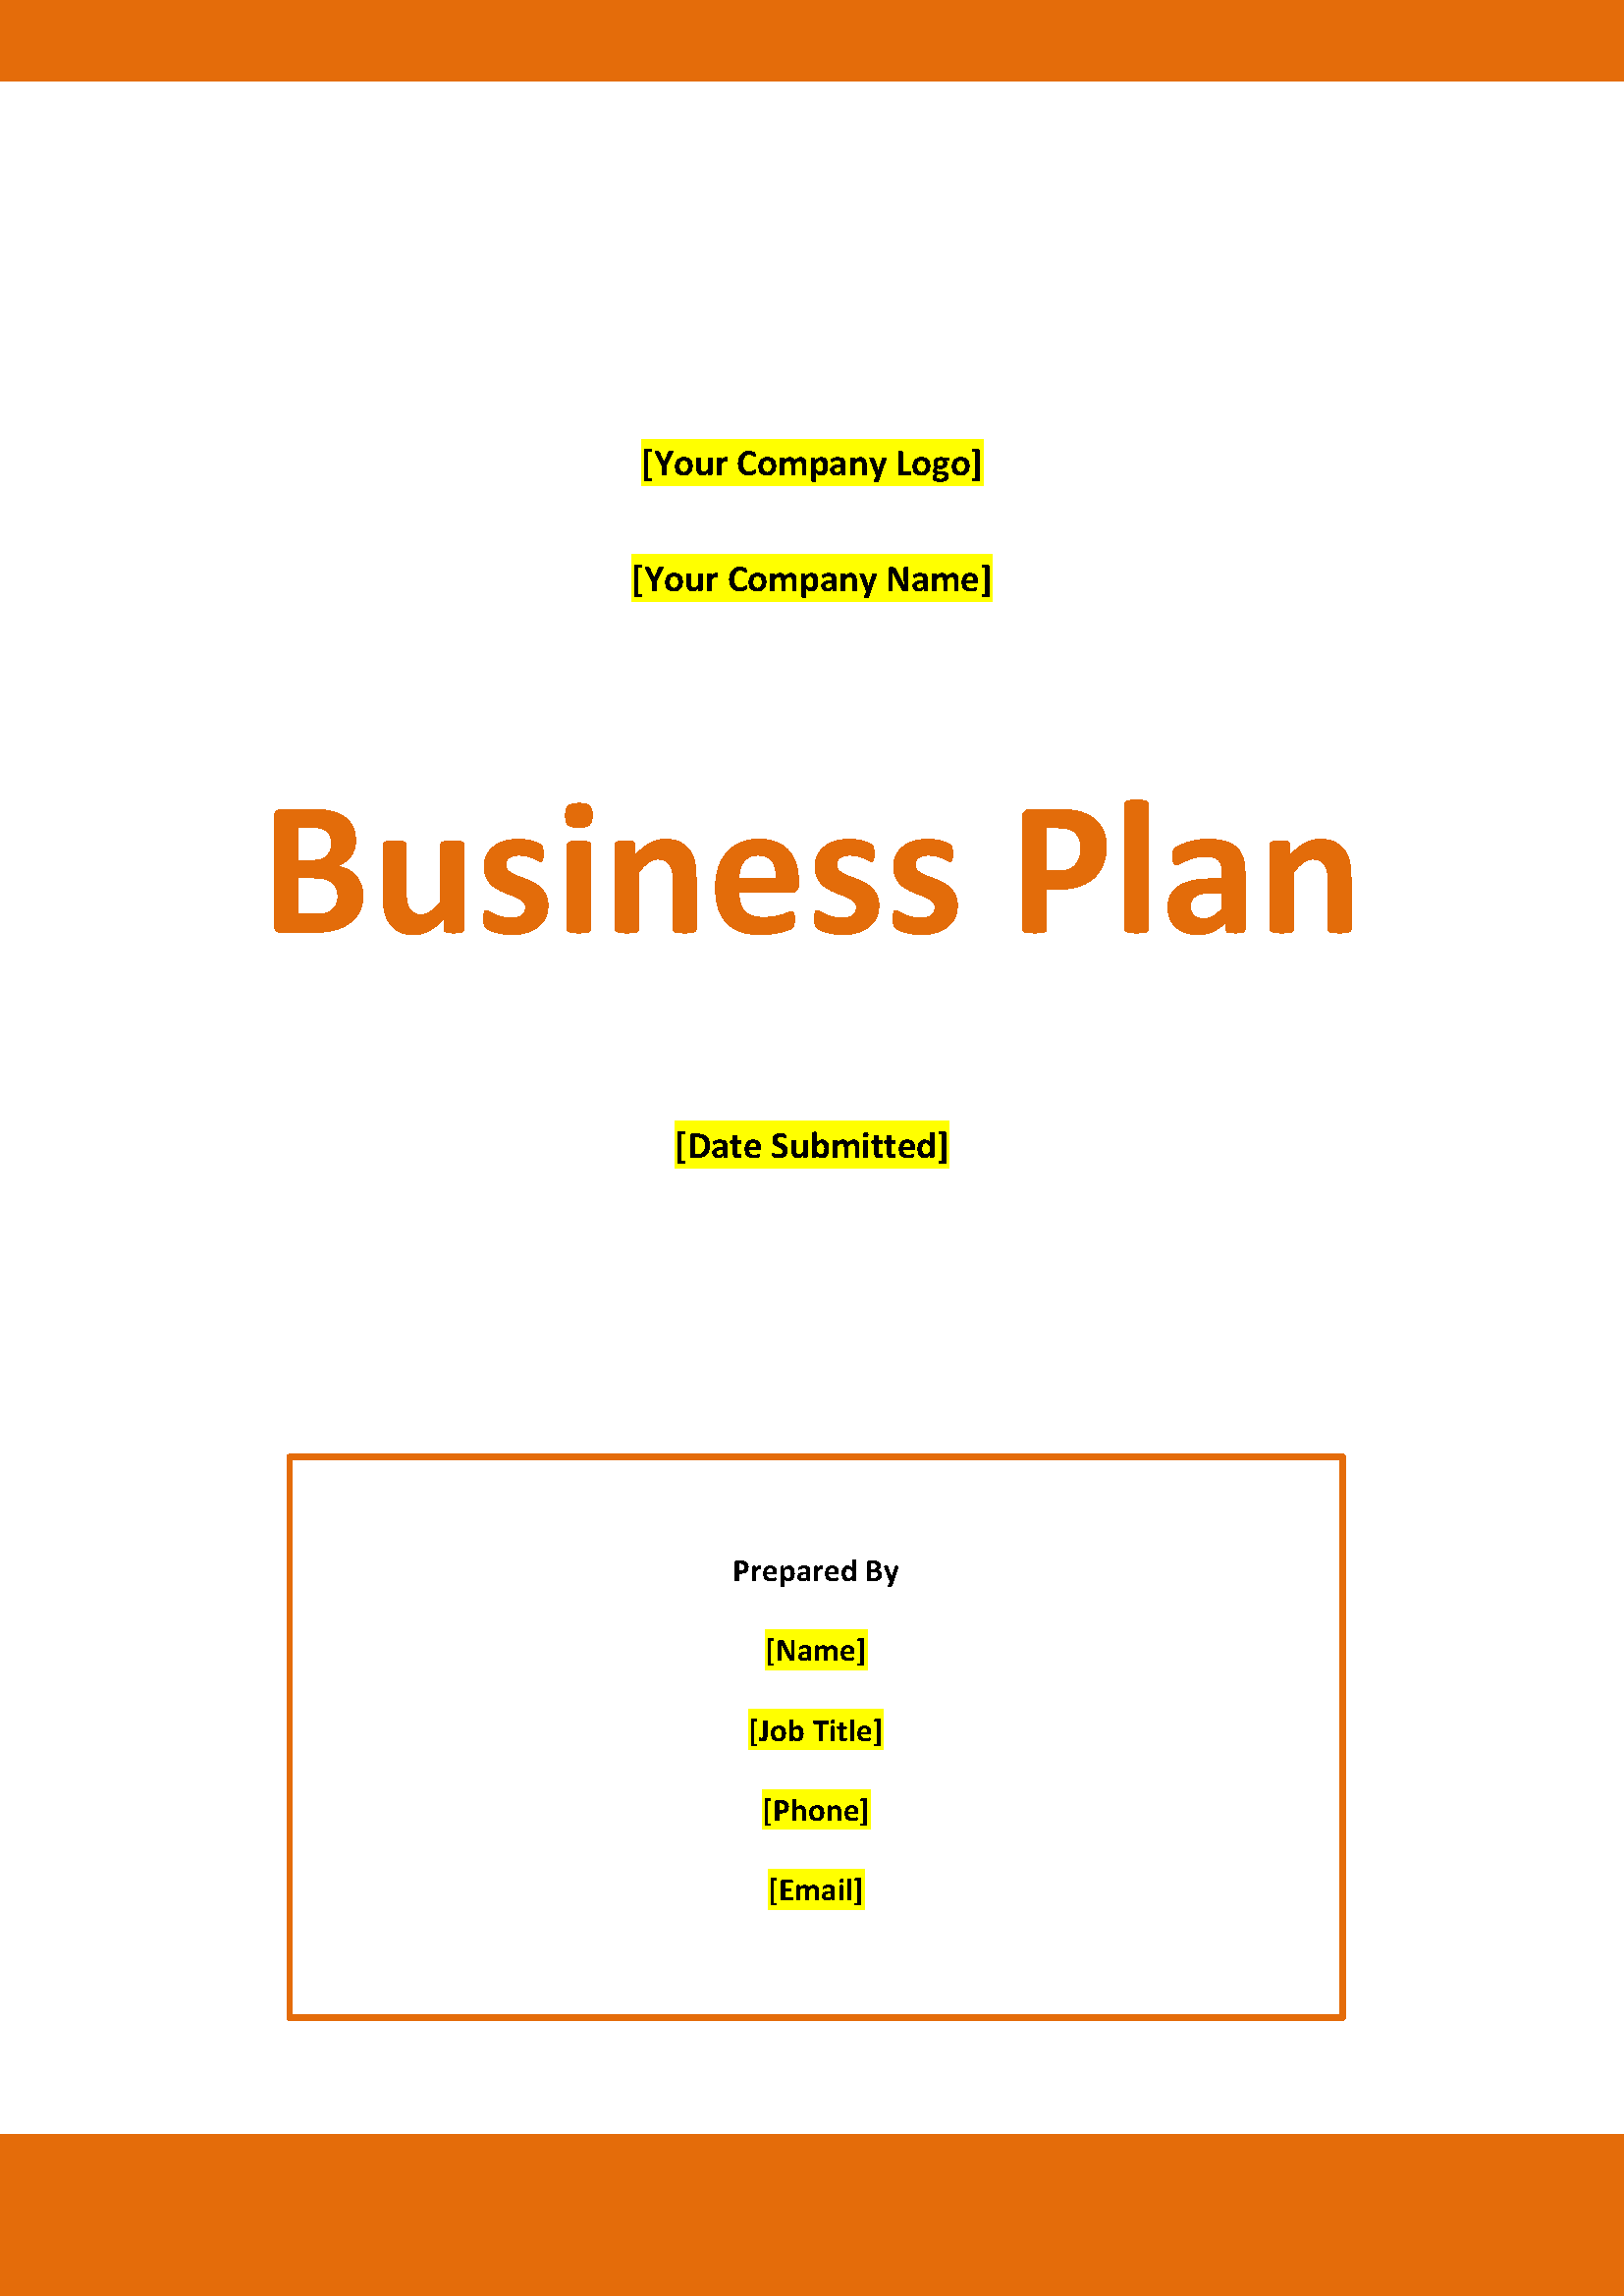 28 - Software Testing Business Plan Template